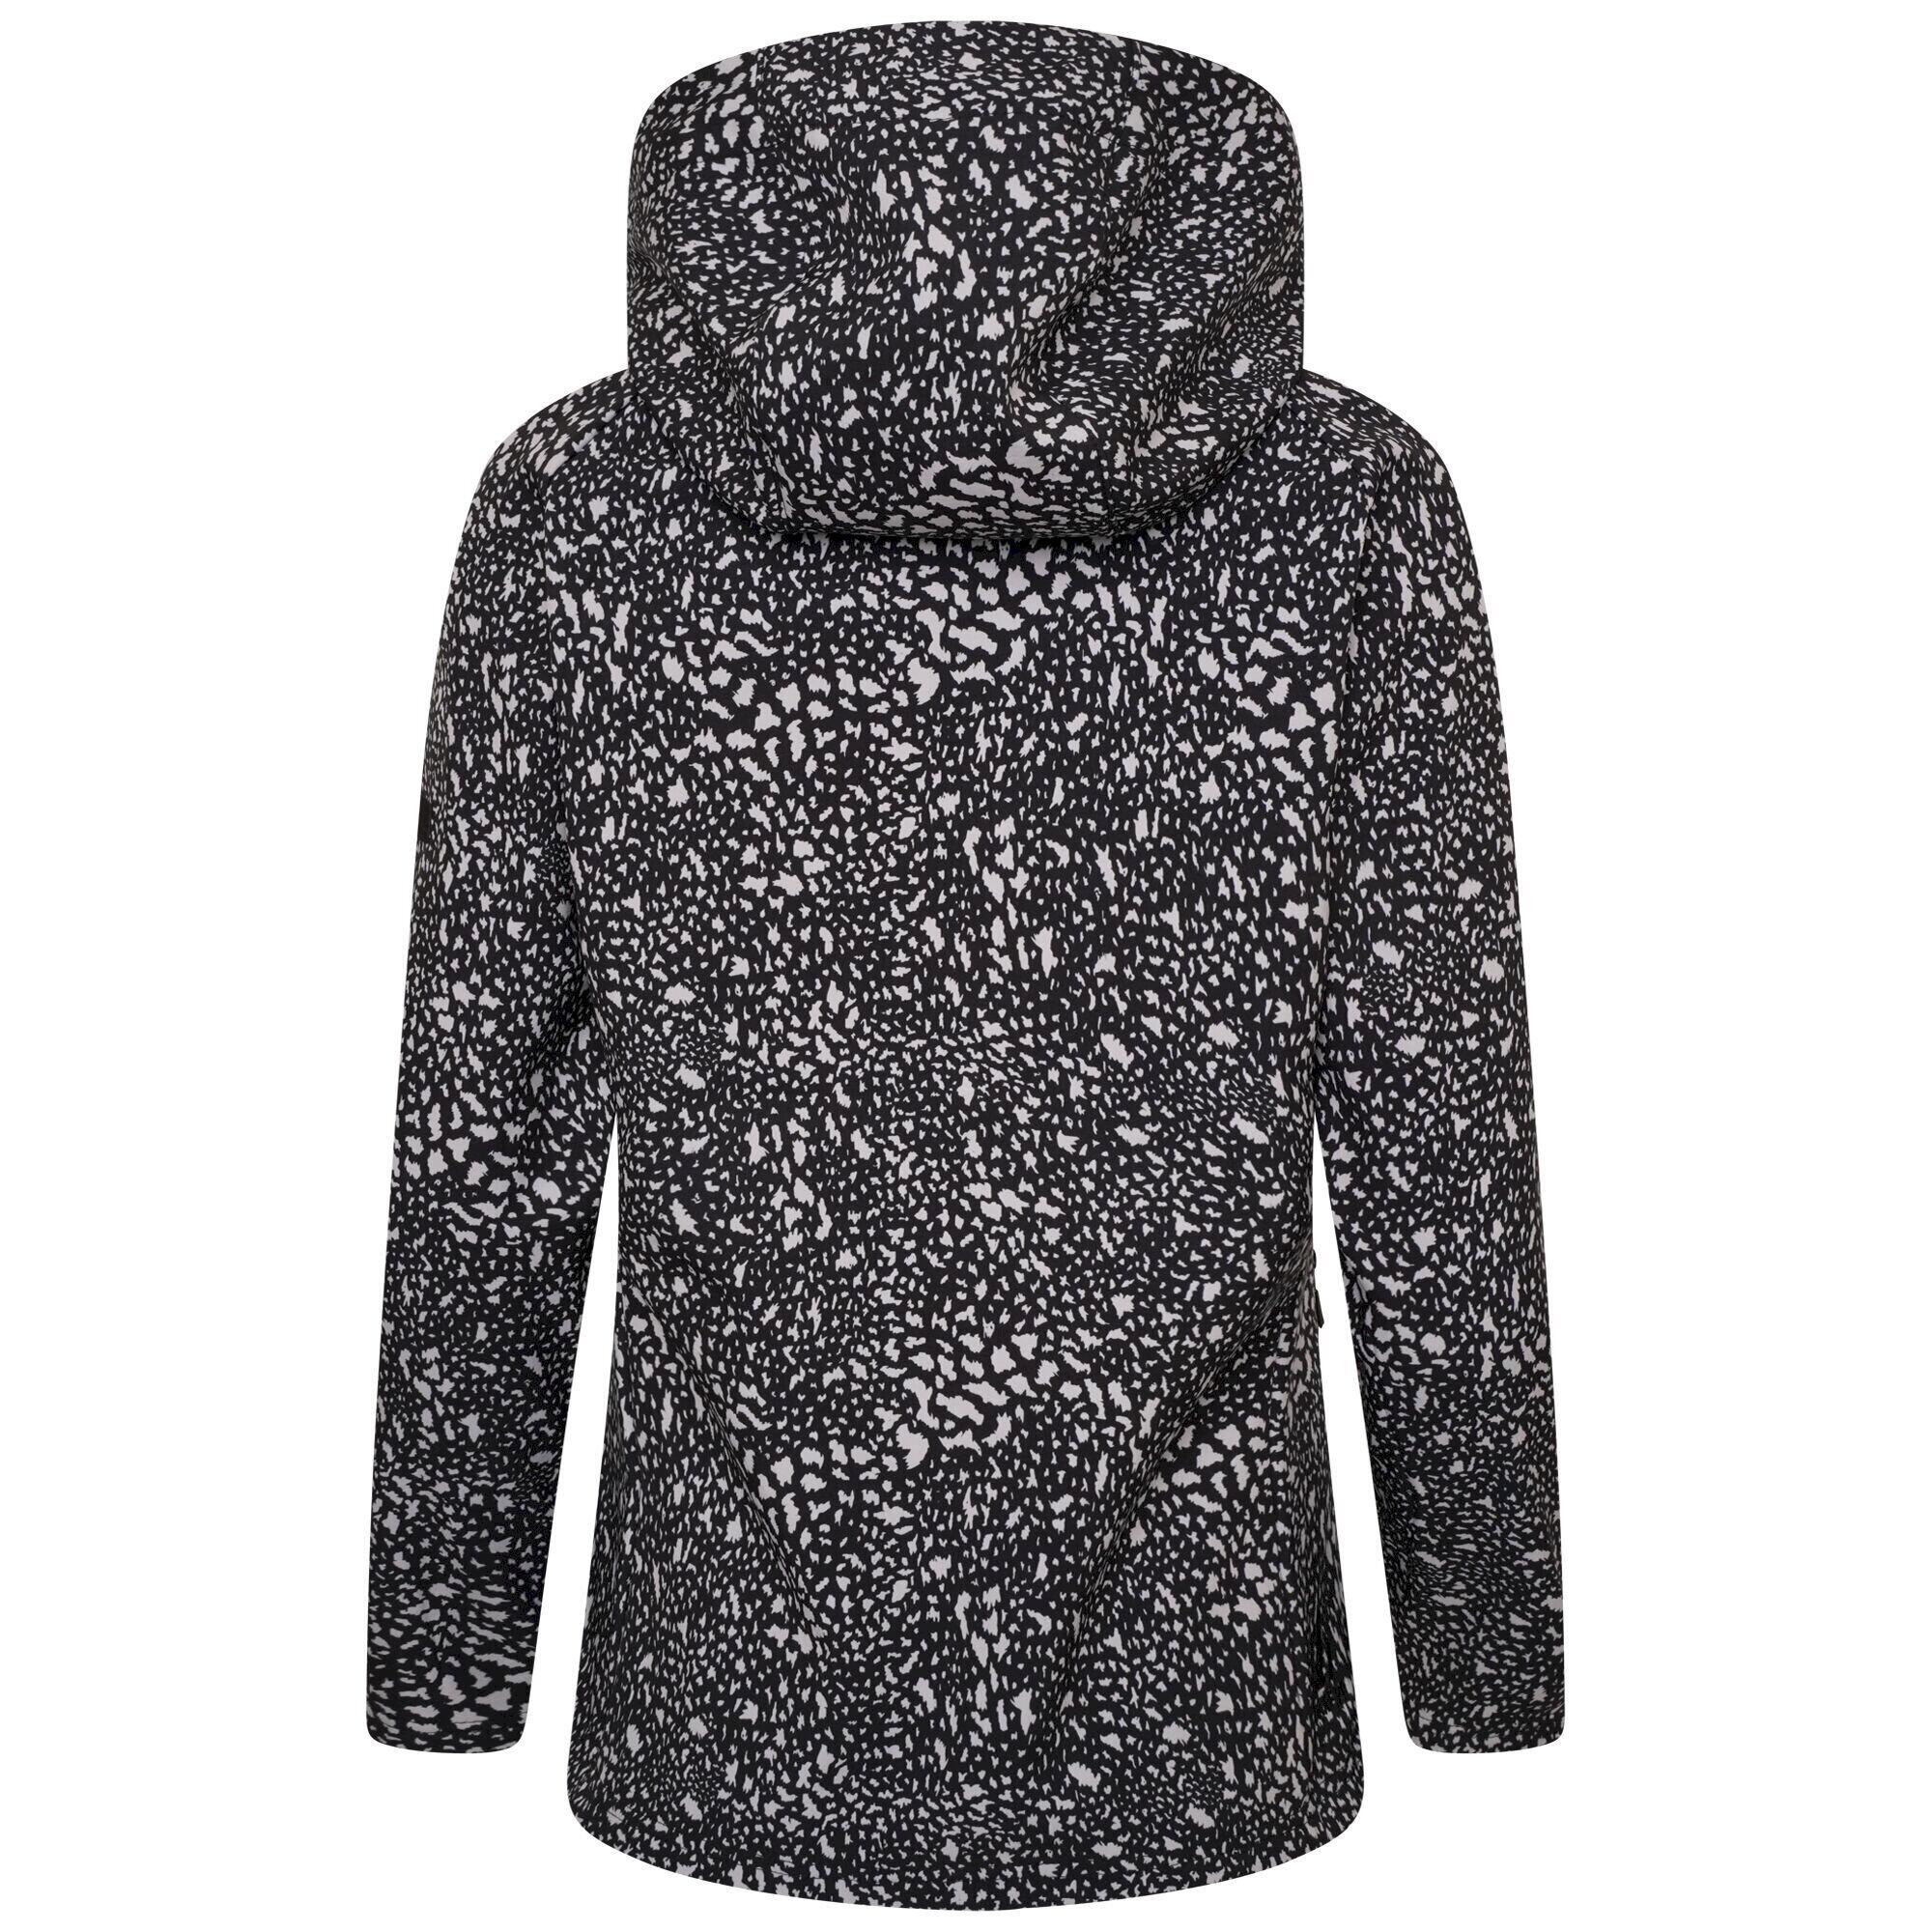 Womens/Ladies Far Out Dotted Soft Shell Jacket (Black/White) 2/5